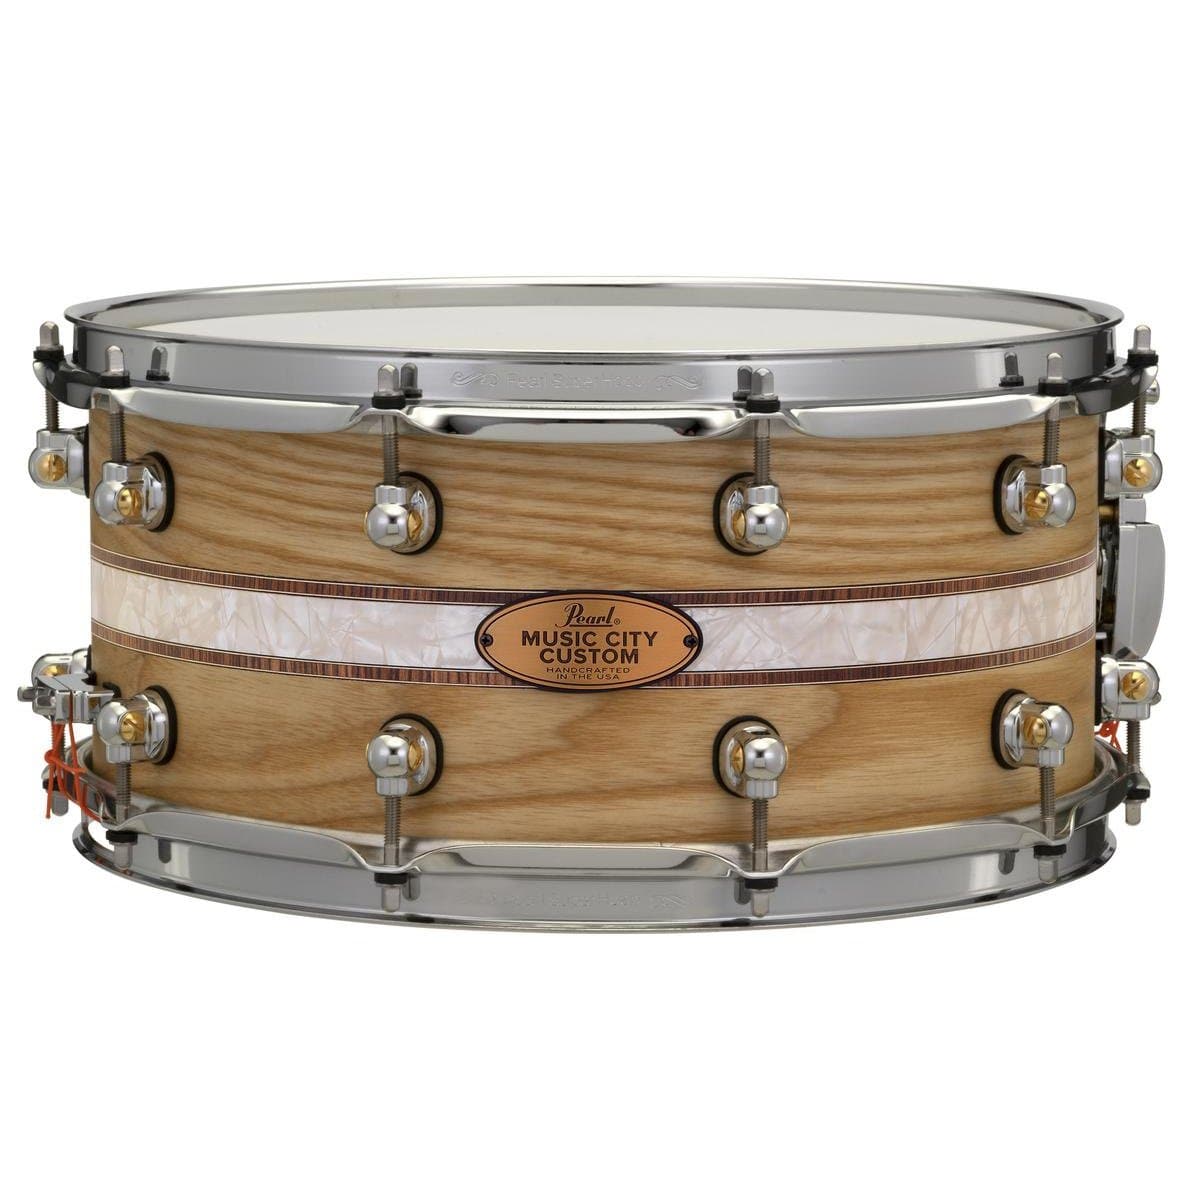 Pearl Music City Custom Solid Ash 14x6.5 Snare Drum - Natural With Kingwood Royal Inlay